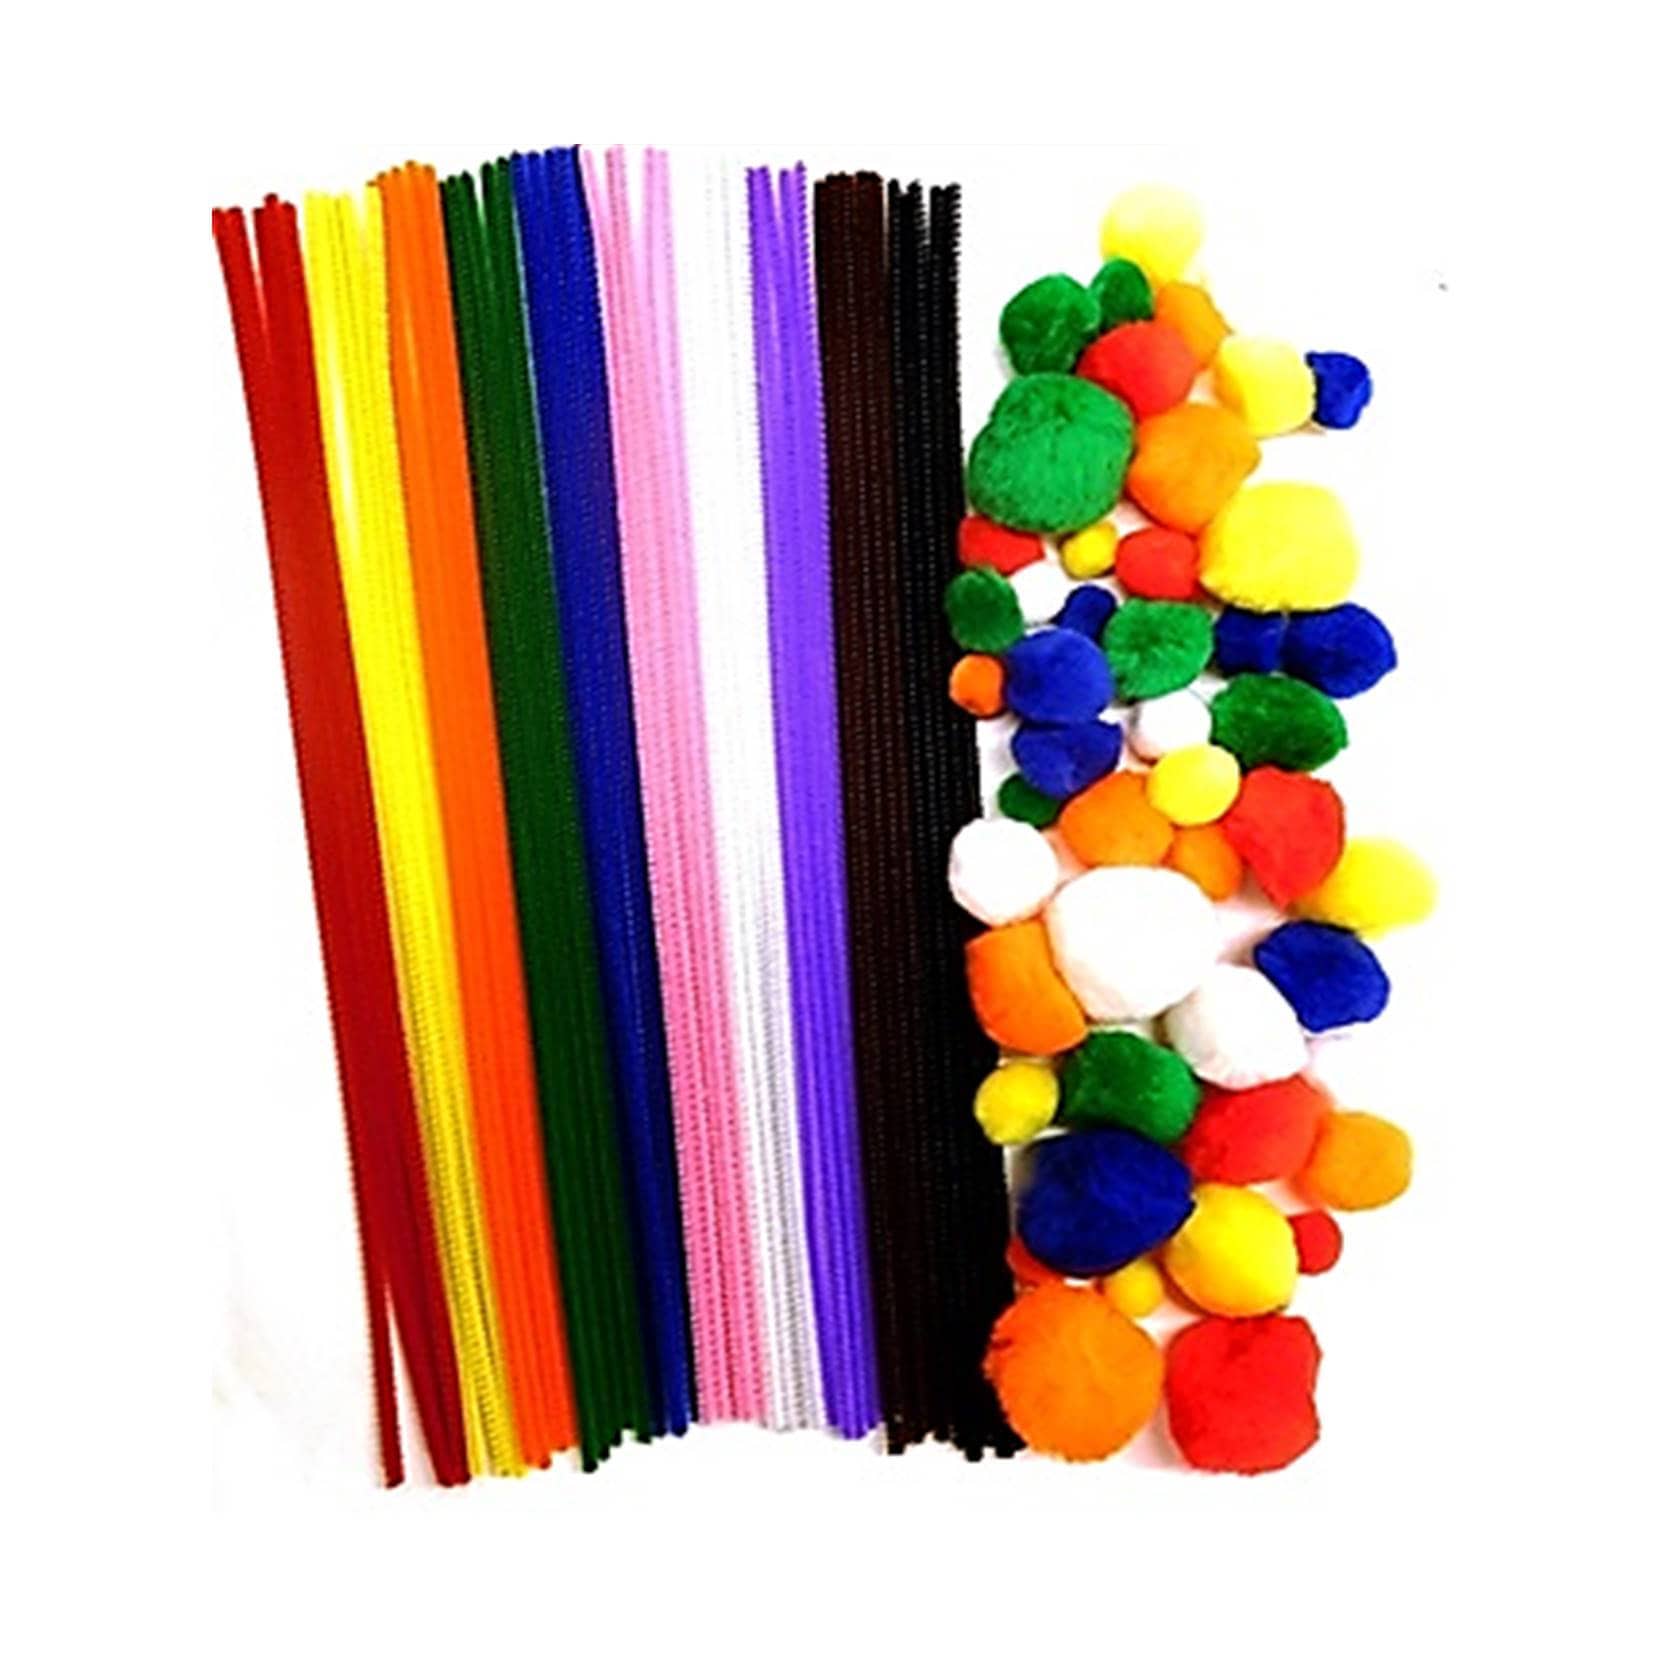 Gold and Silver Glitter Pipe Cleaners 300mm - 100 Pack, Collage Materials